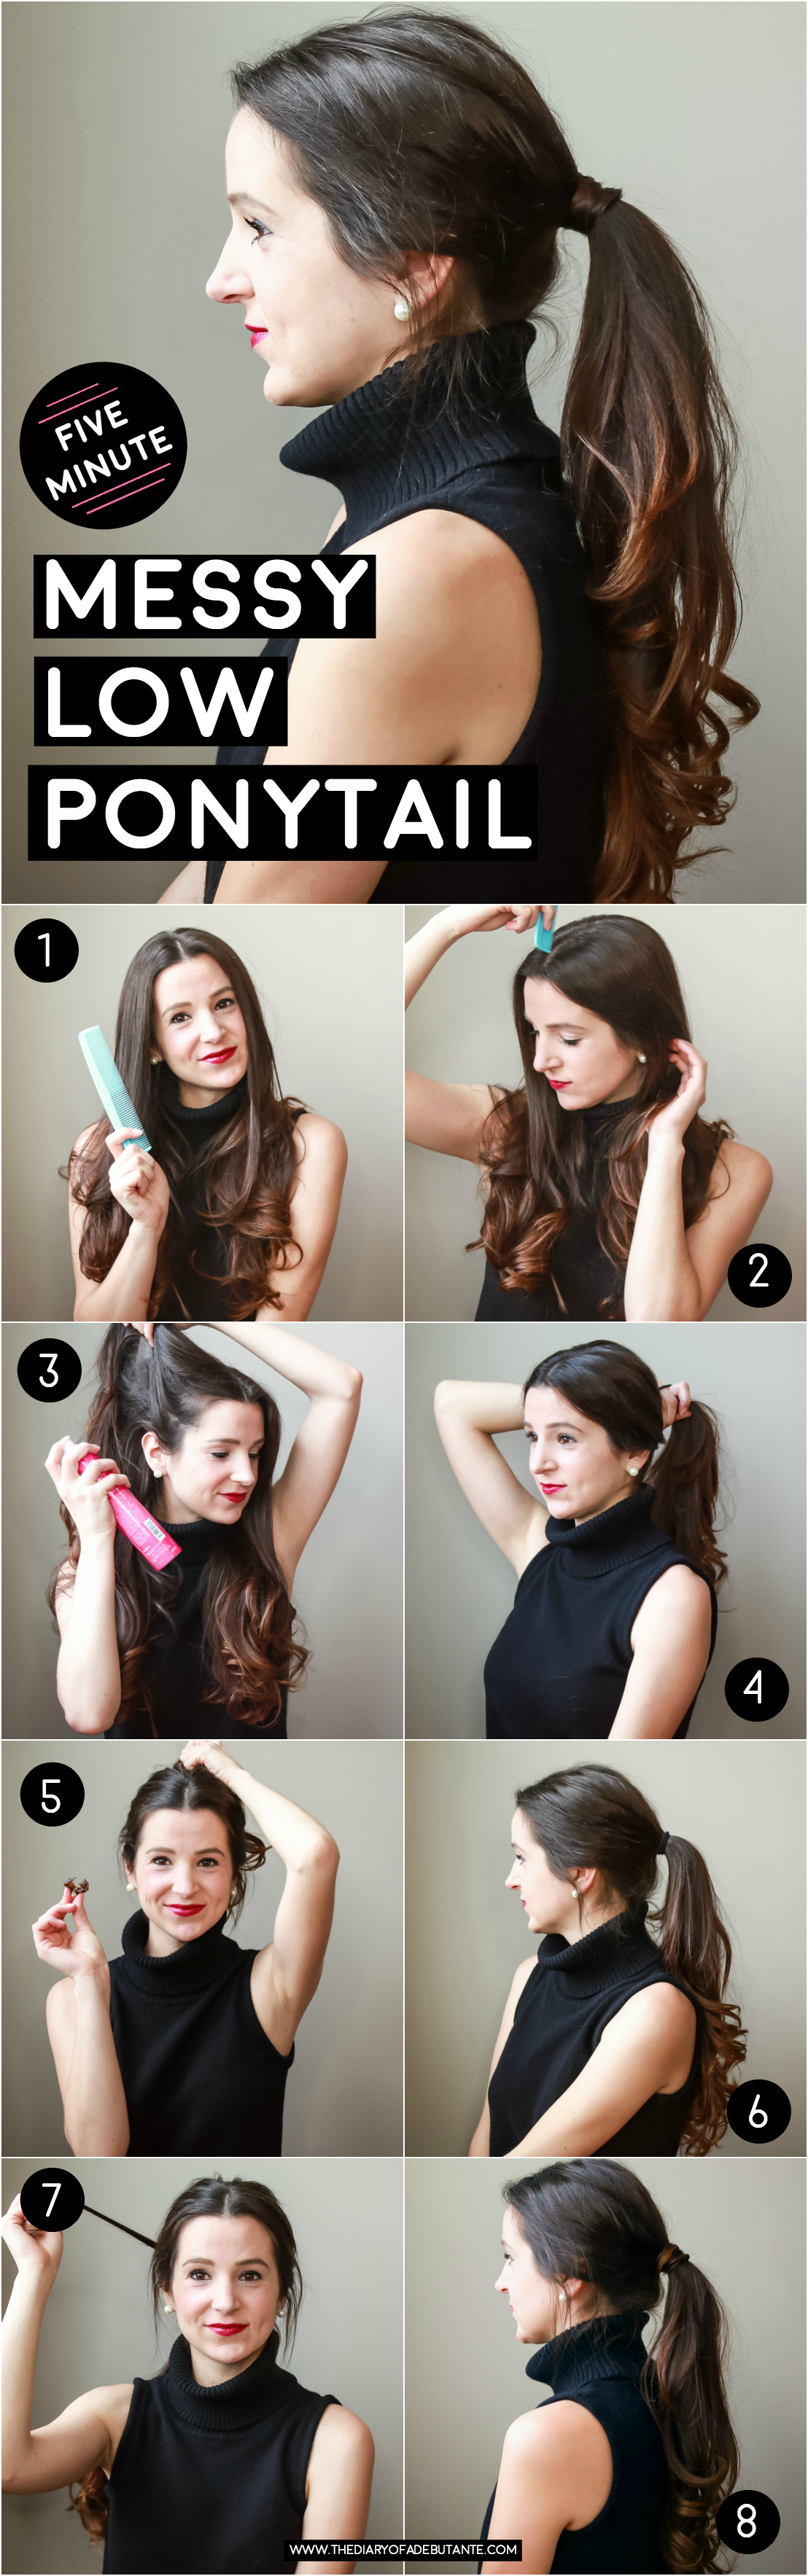 5-minute messy low ponytail hair tutorial by southern blogger Stephanie Ziaka from Diary of a Debutante